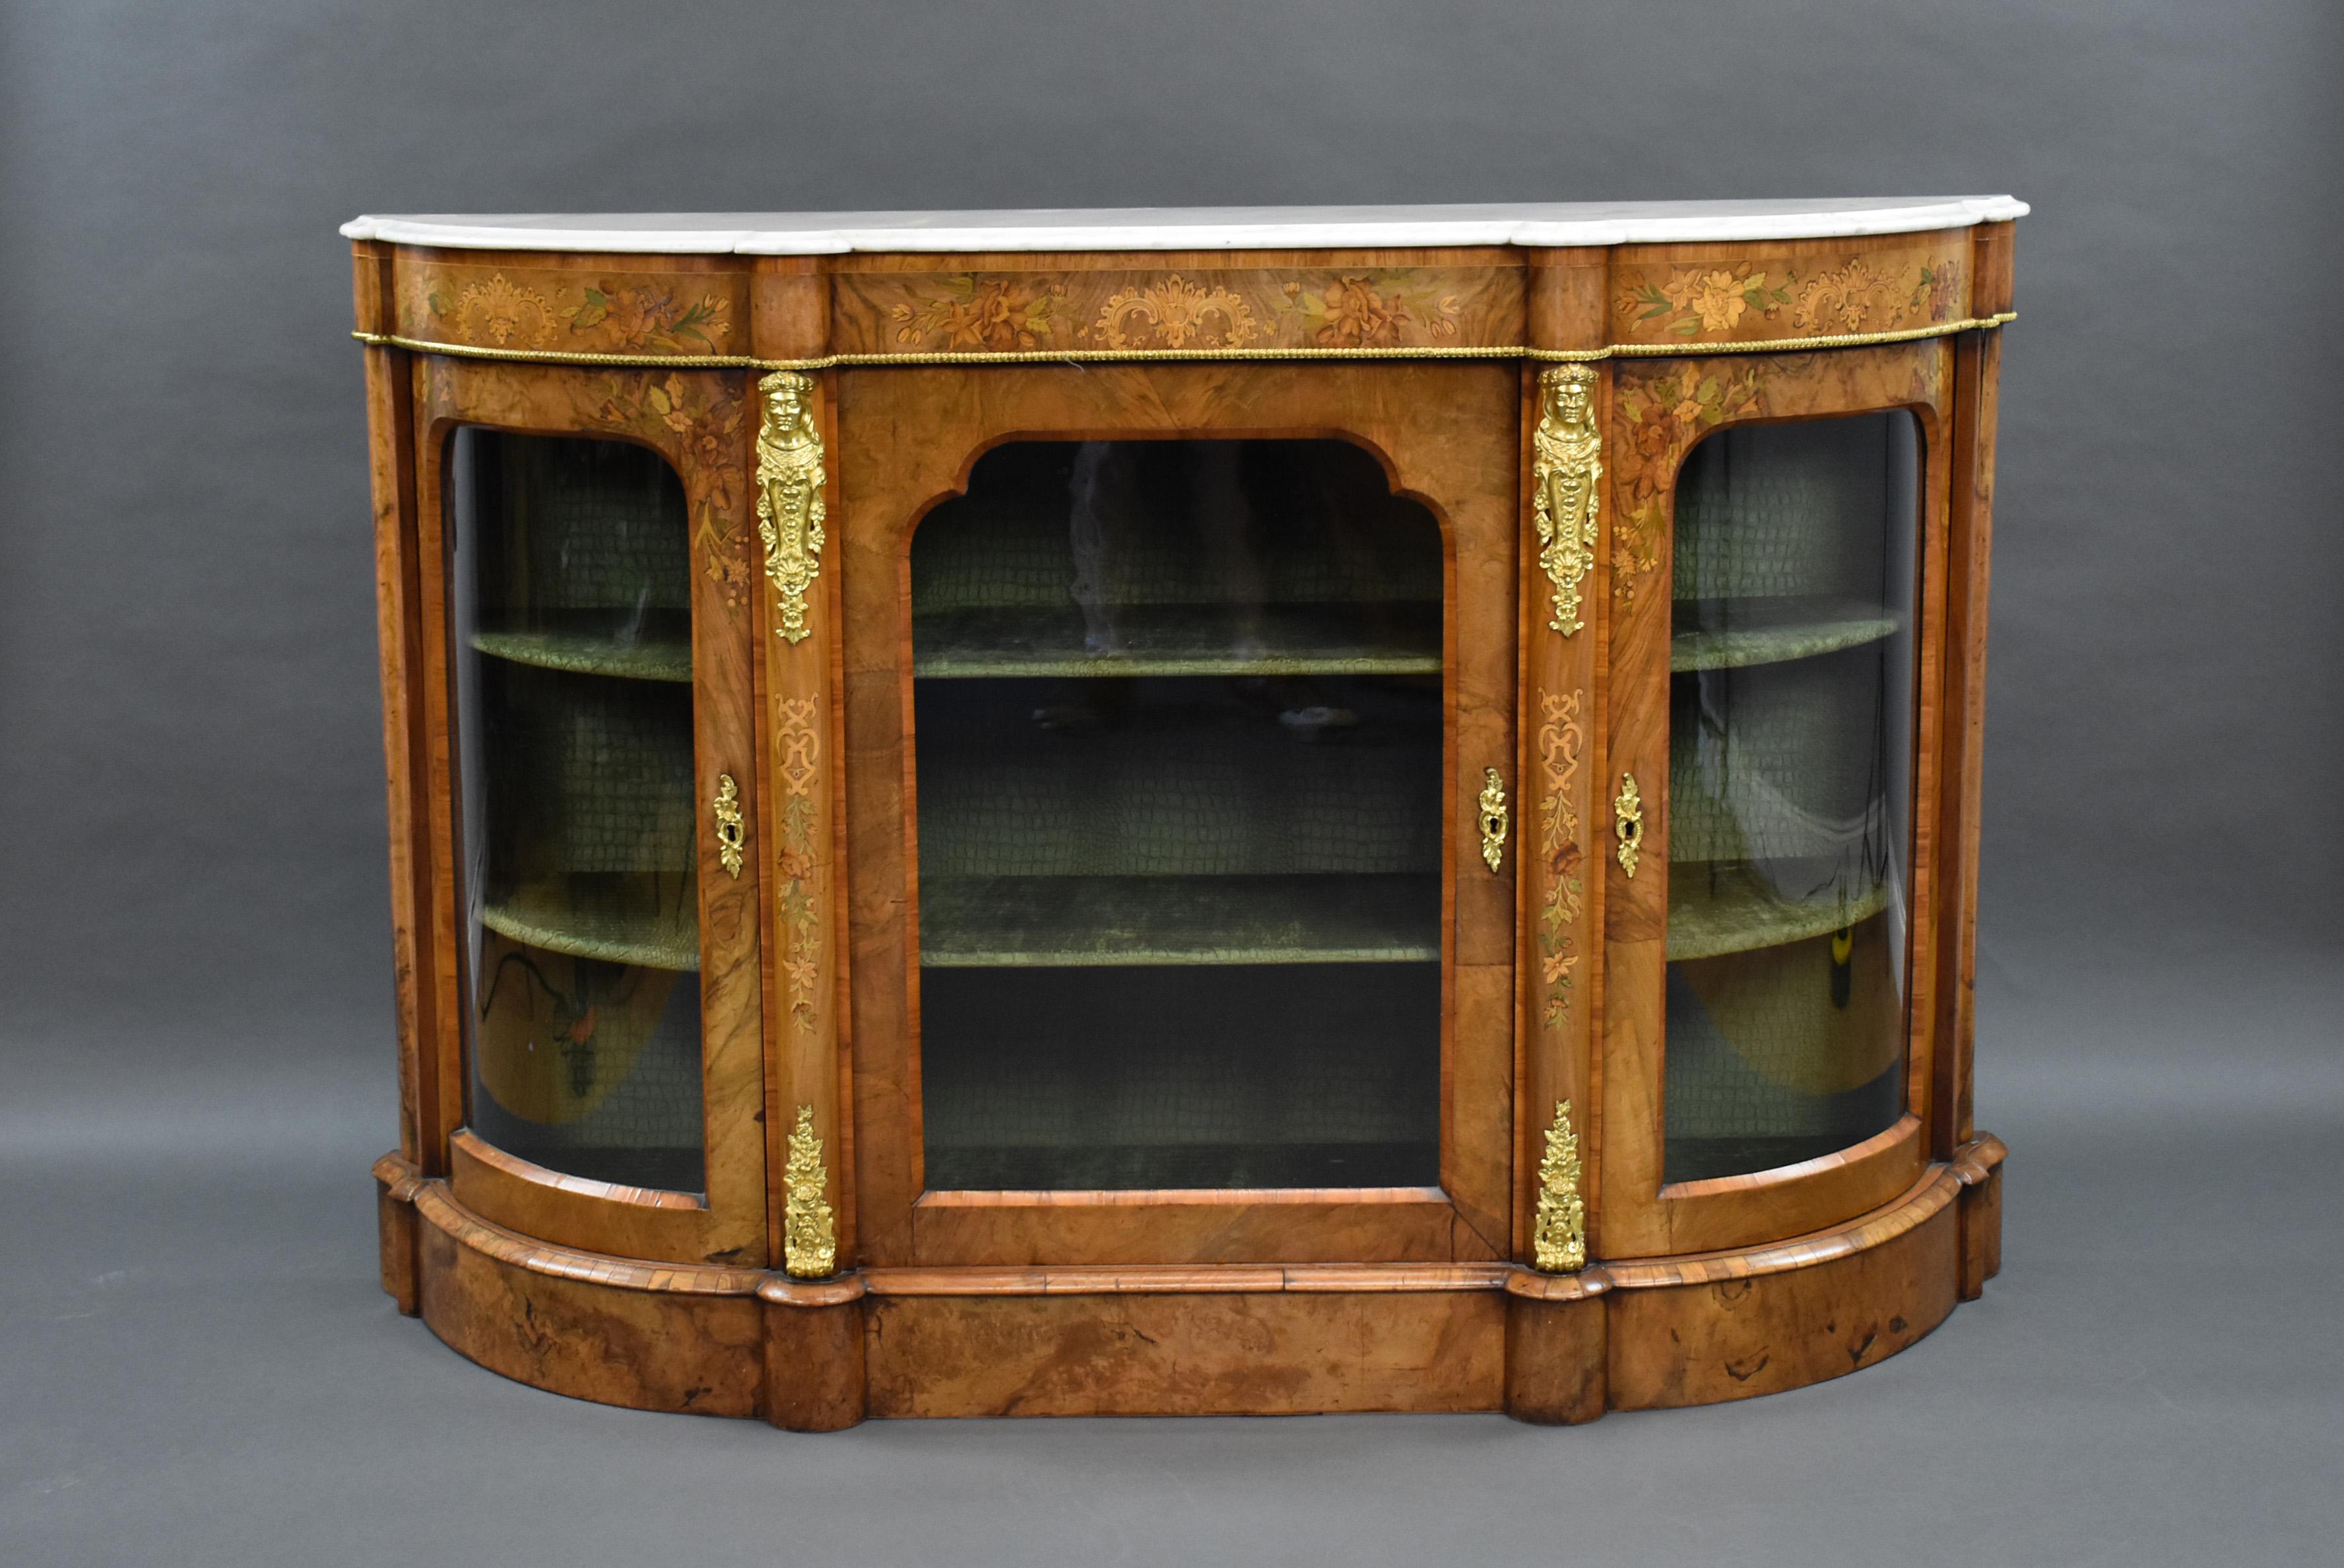 For sale is a very good quality Victorian burr walnut and floral marquetry inlaid D ended credenza, having tulip wood cross banding to the doors and edges of the cabinet. The credenza is decorated with bronze gilt ormolu mounts and mouldings, it